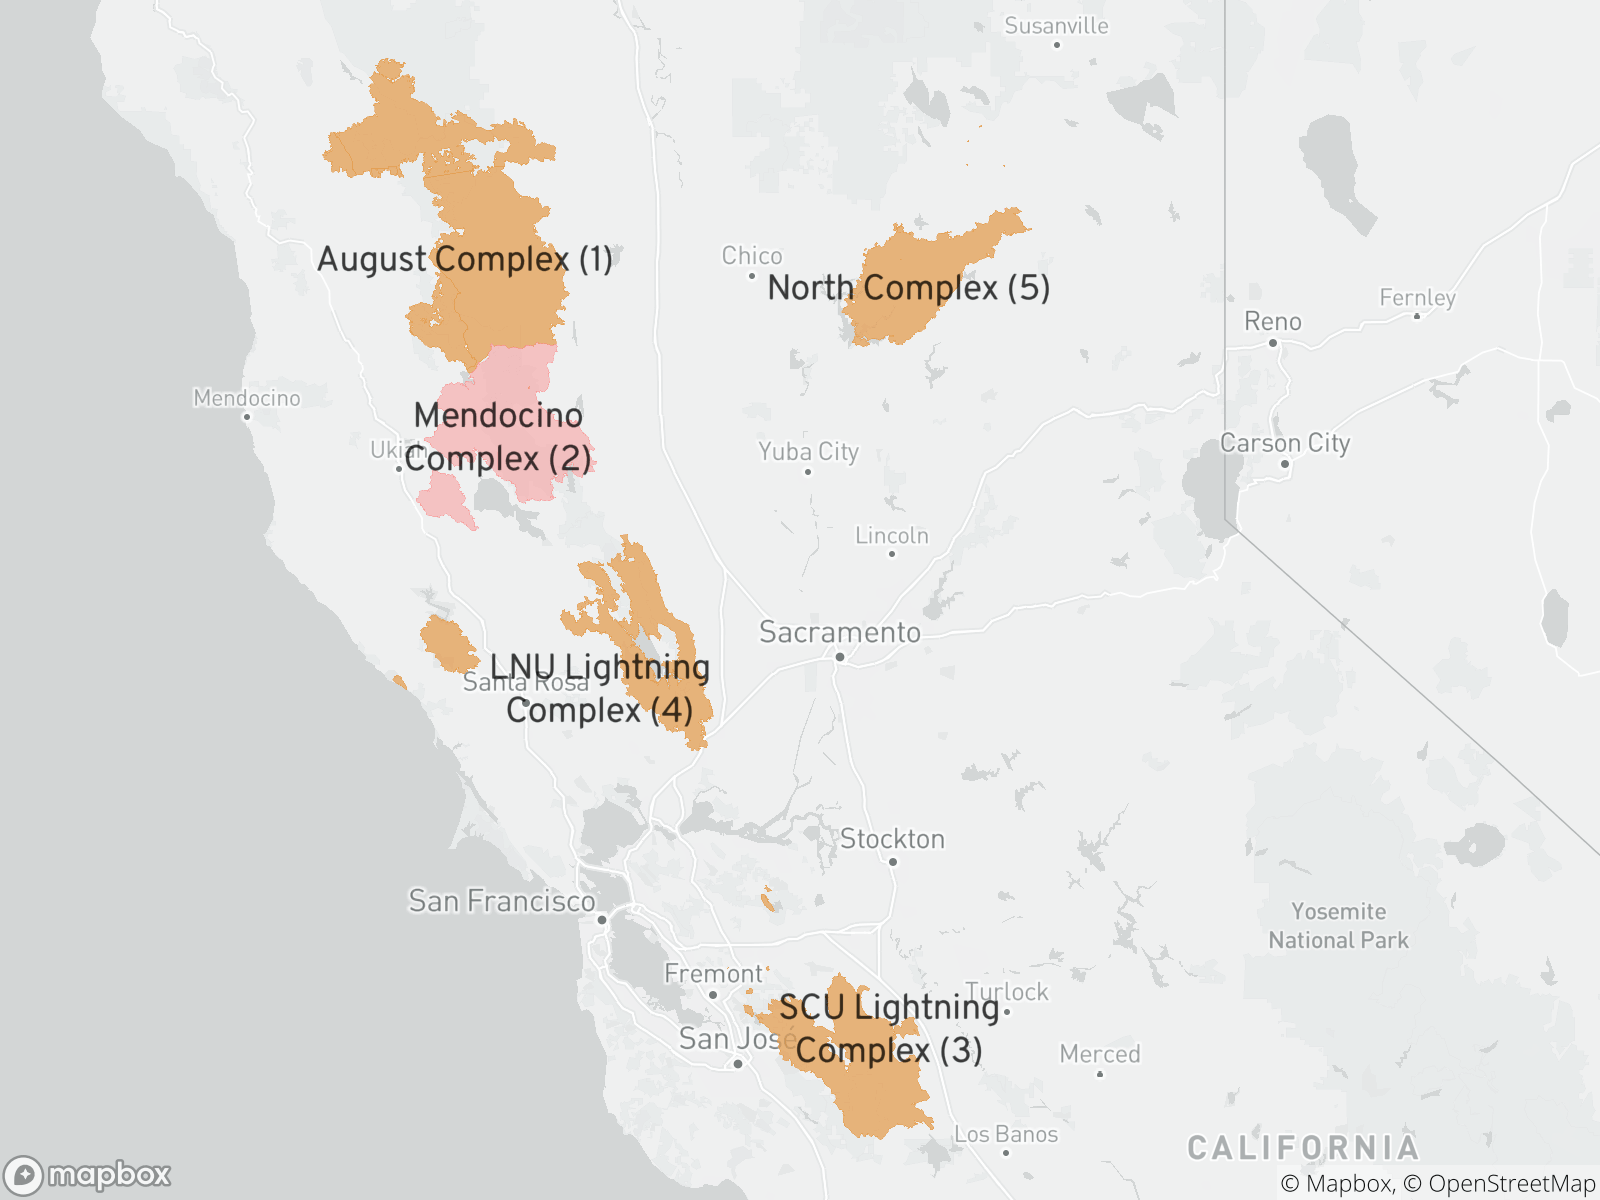 Four of the five largest fires in California history have occurred this year. One, the Mendocino Complex, was in 2018. November 2020